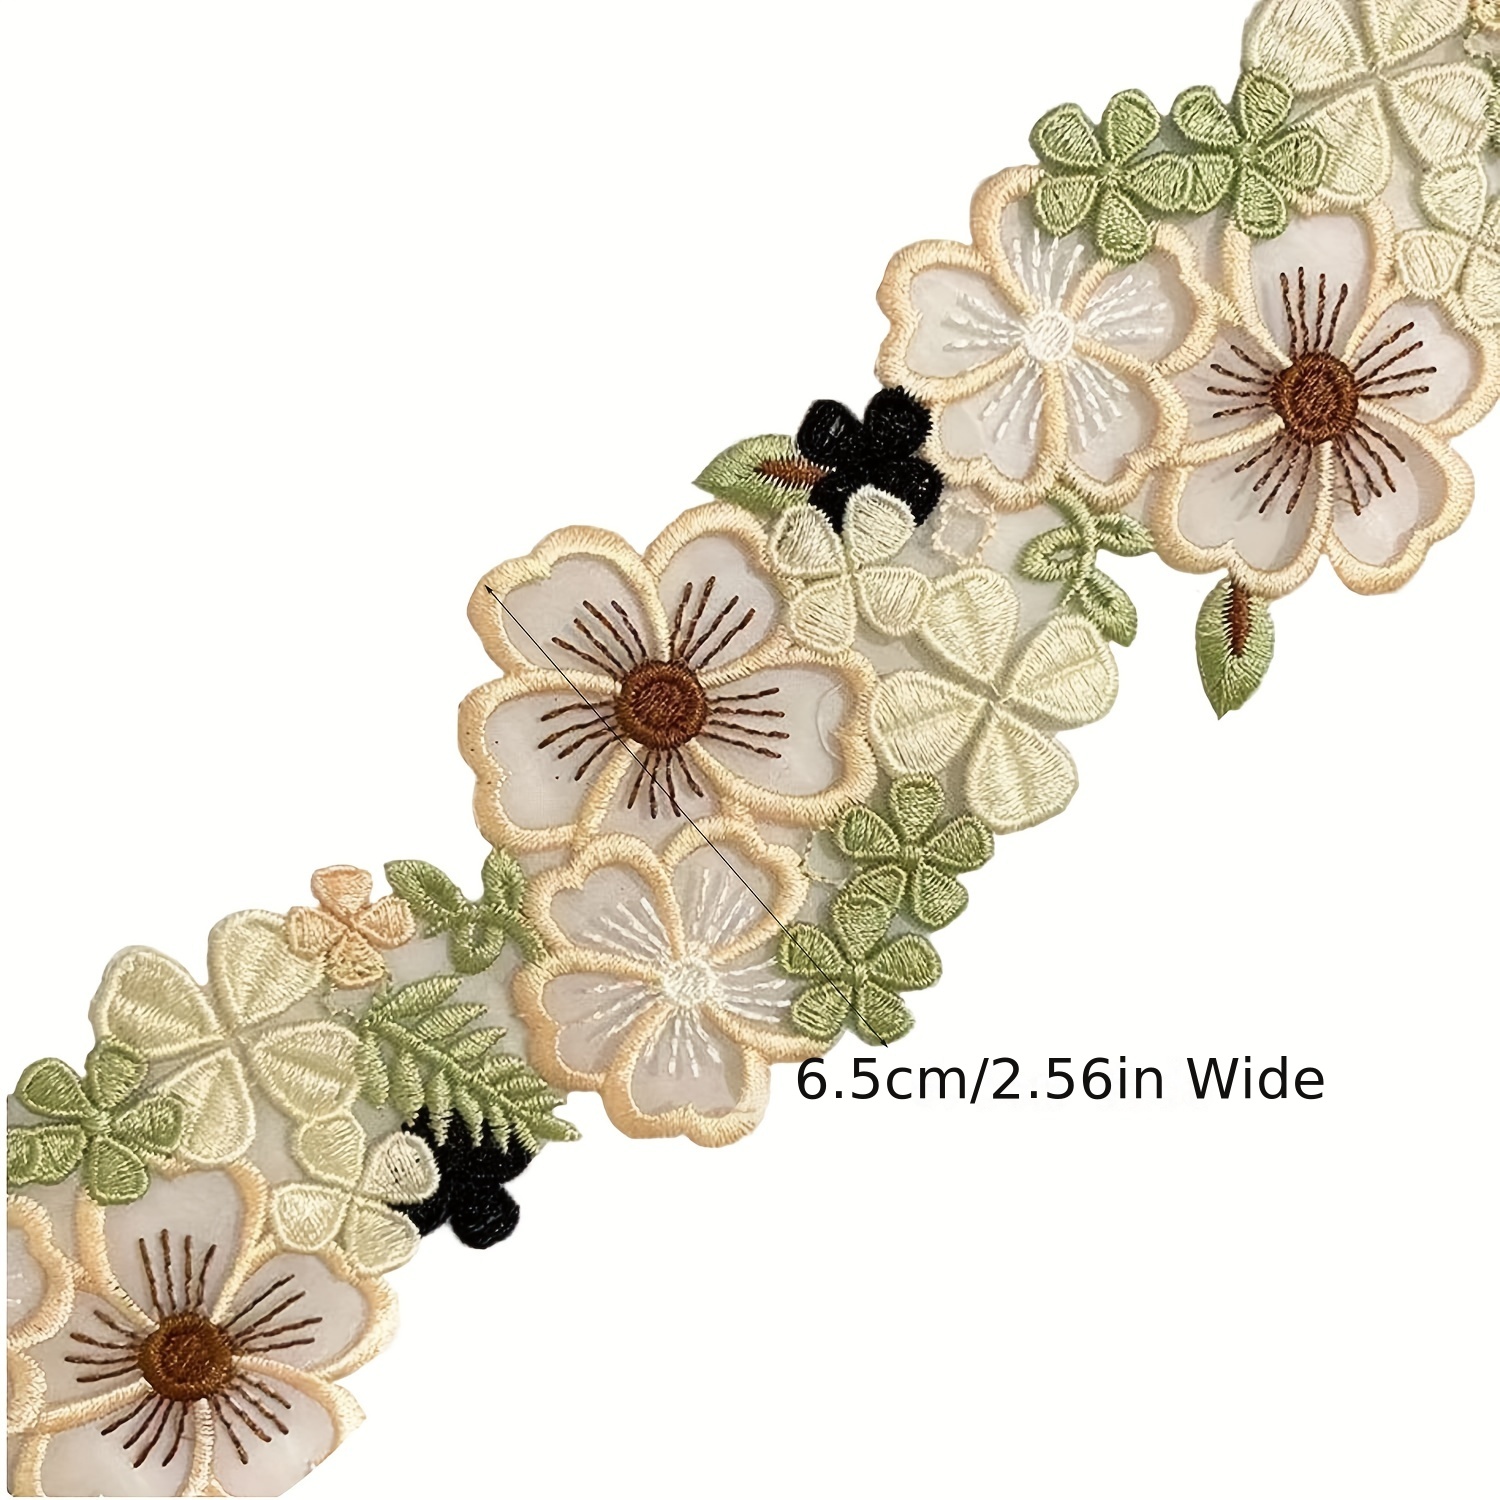 1yard Width:5.7cm (2.28) New Models Flower Lace Handmade Cotton Laces  Sewing Lace Trims Decorative (ss-2033)